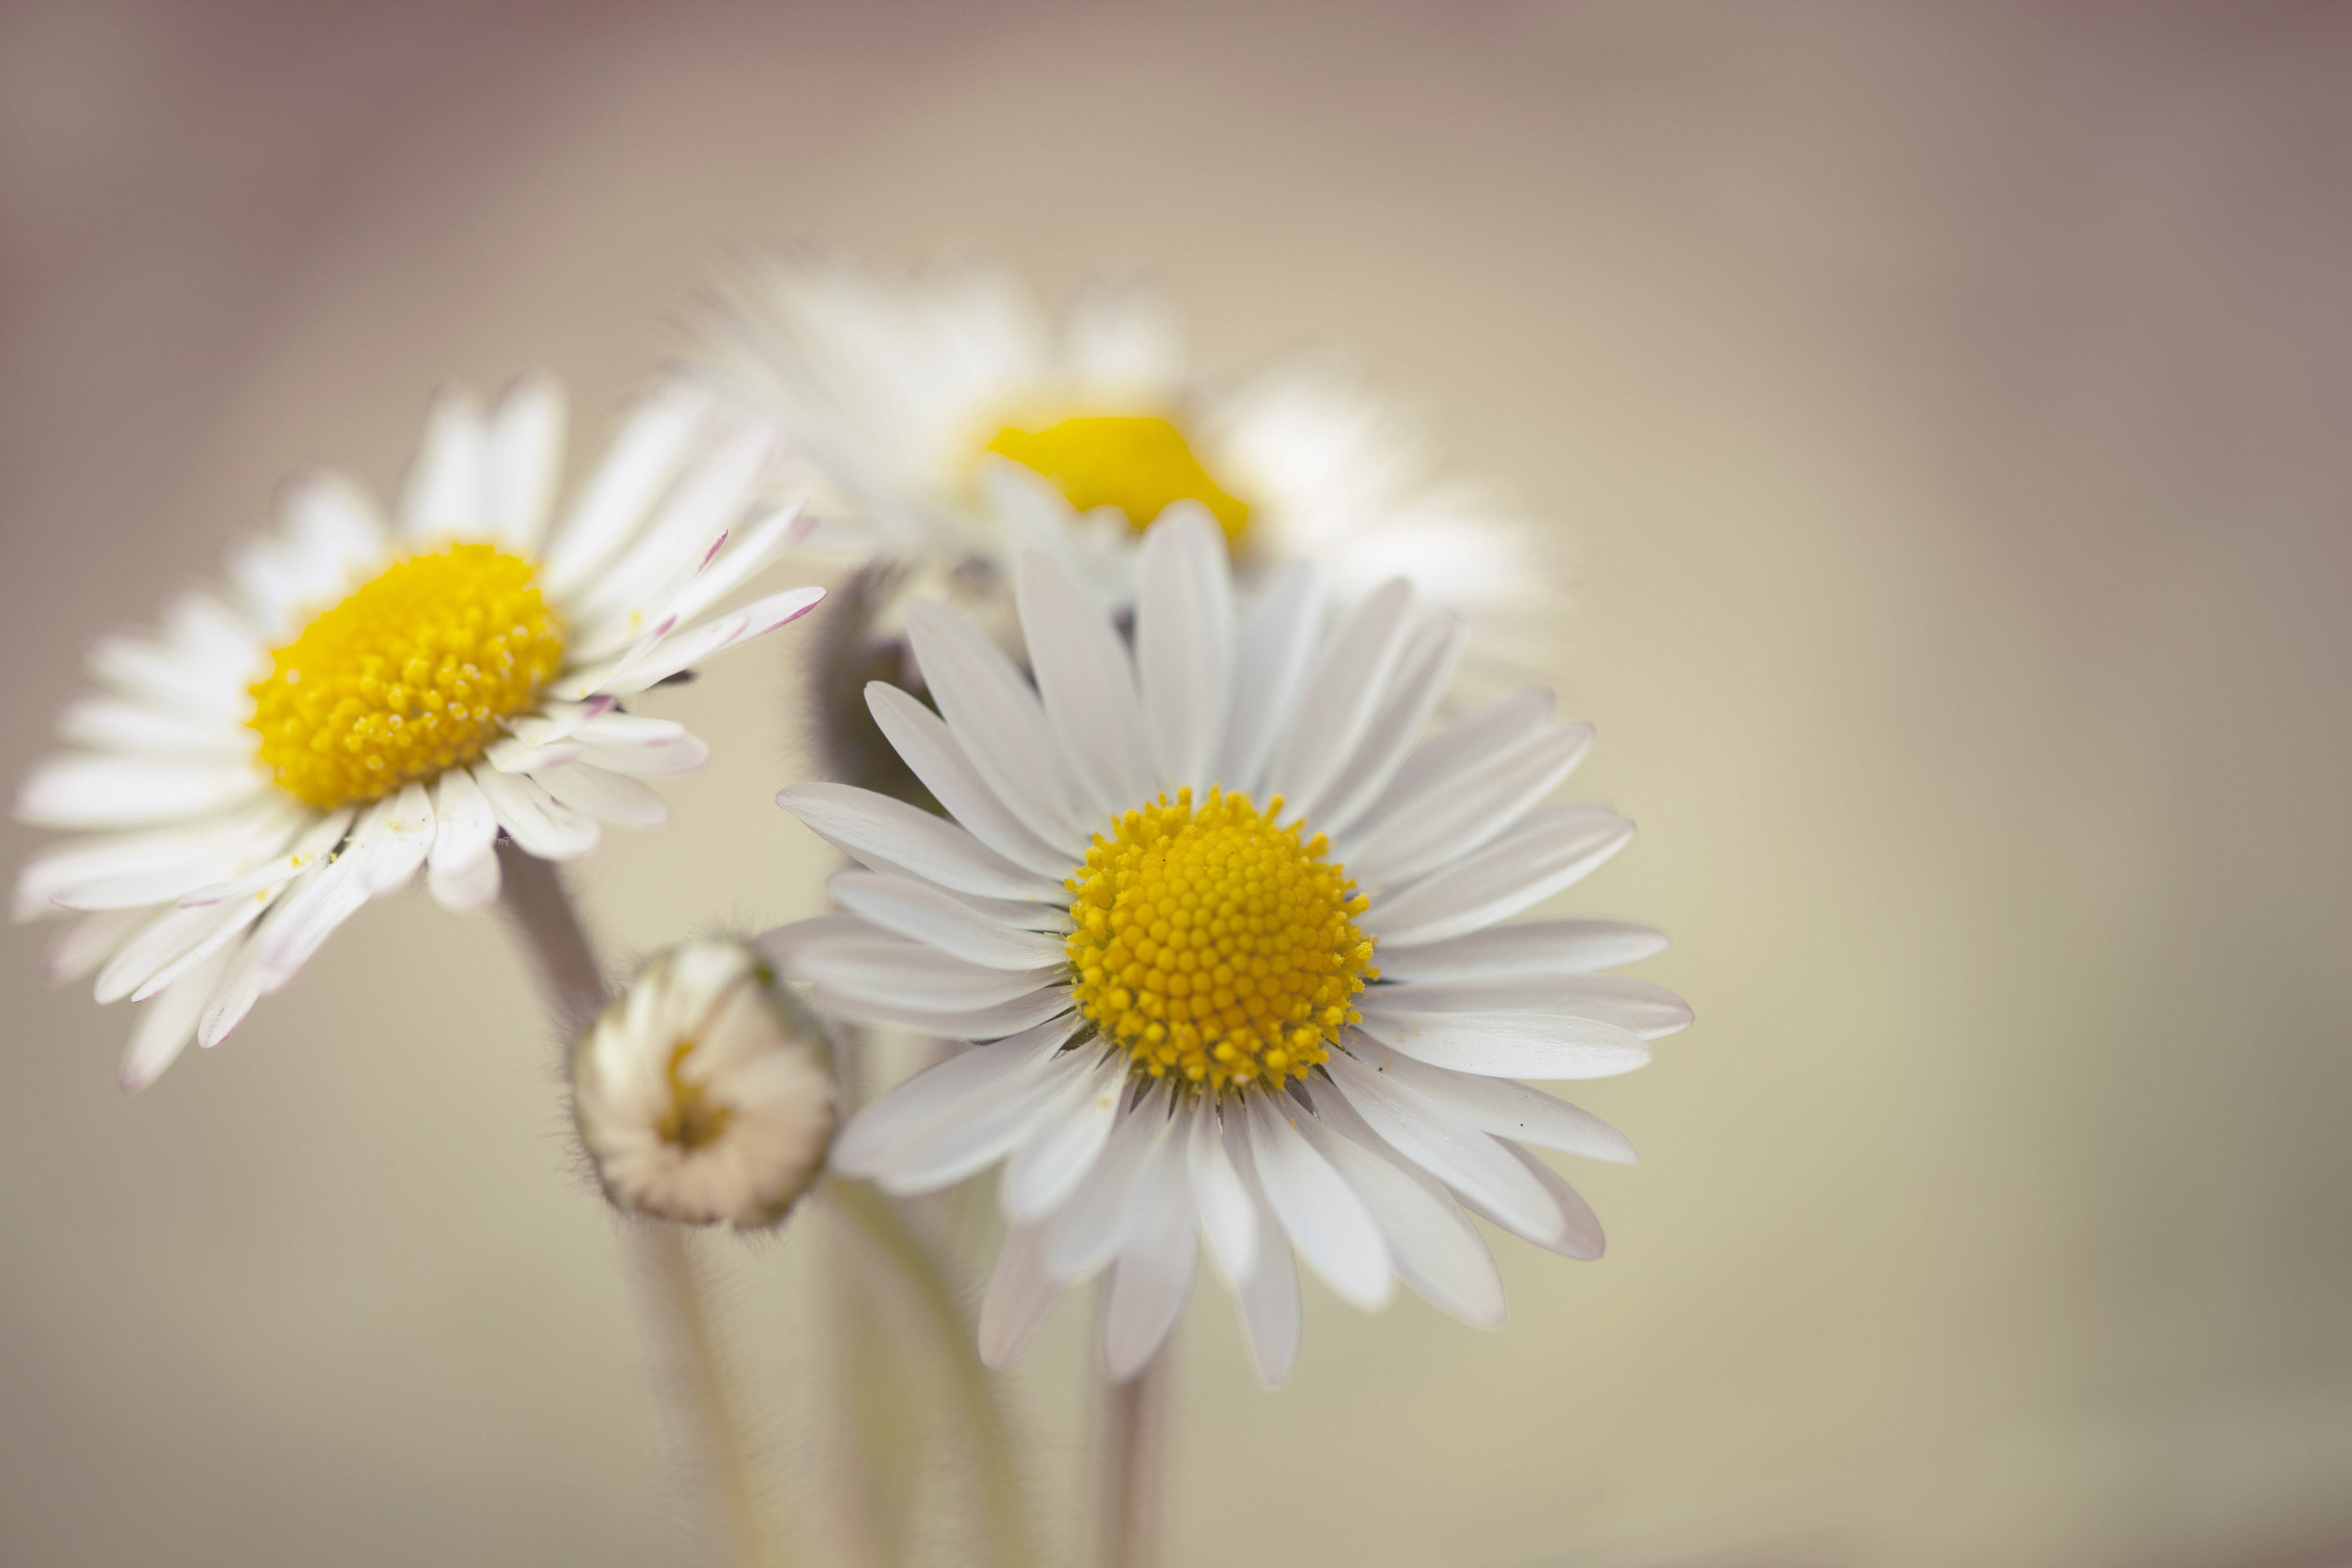 Daisy Wallpapers - Wallpaper Cave